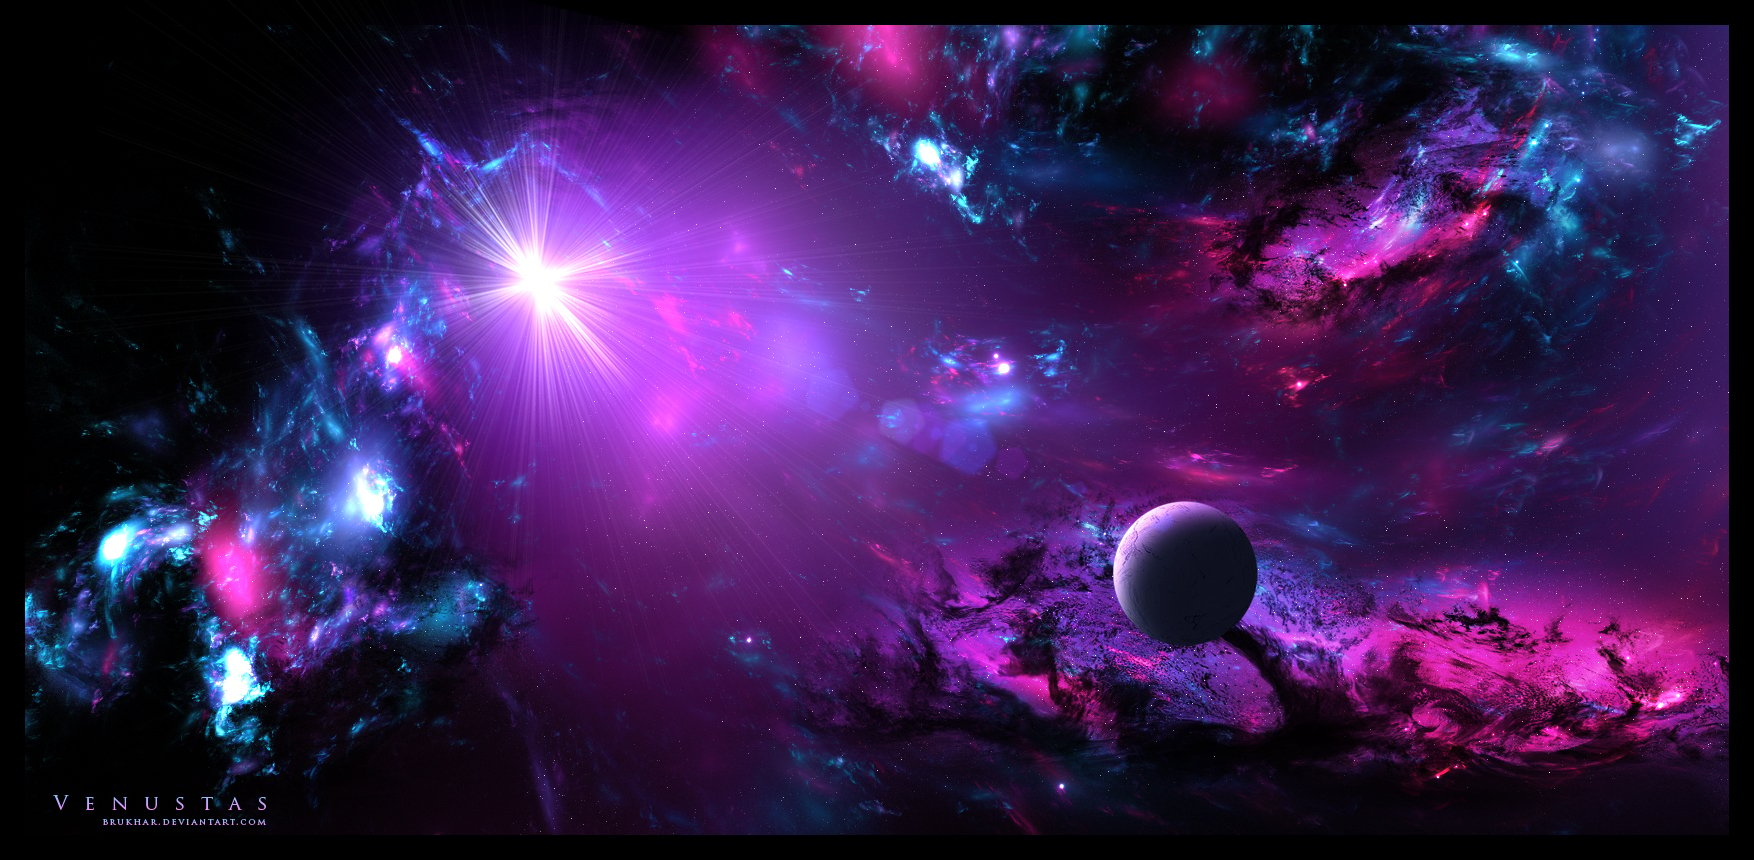 SpaceFantasy Wallpaper Set Awesome Wallpapers